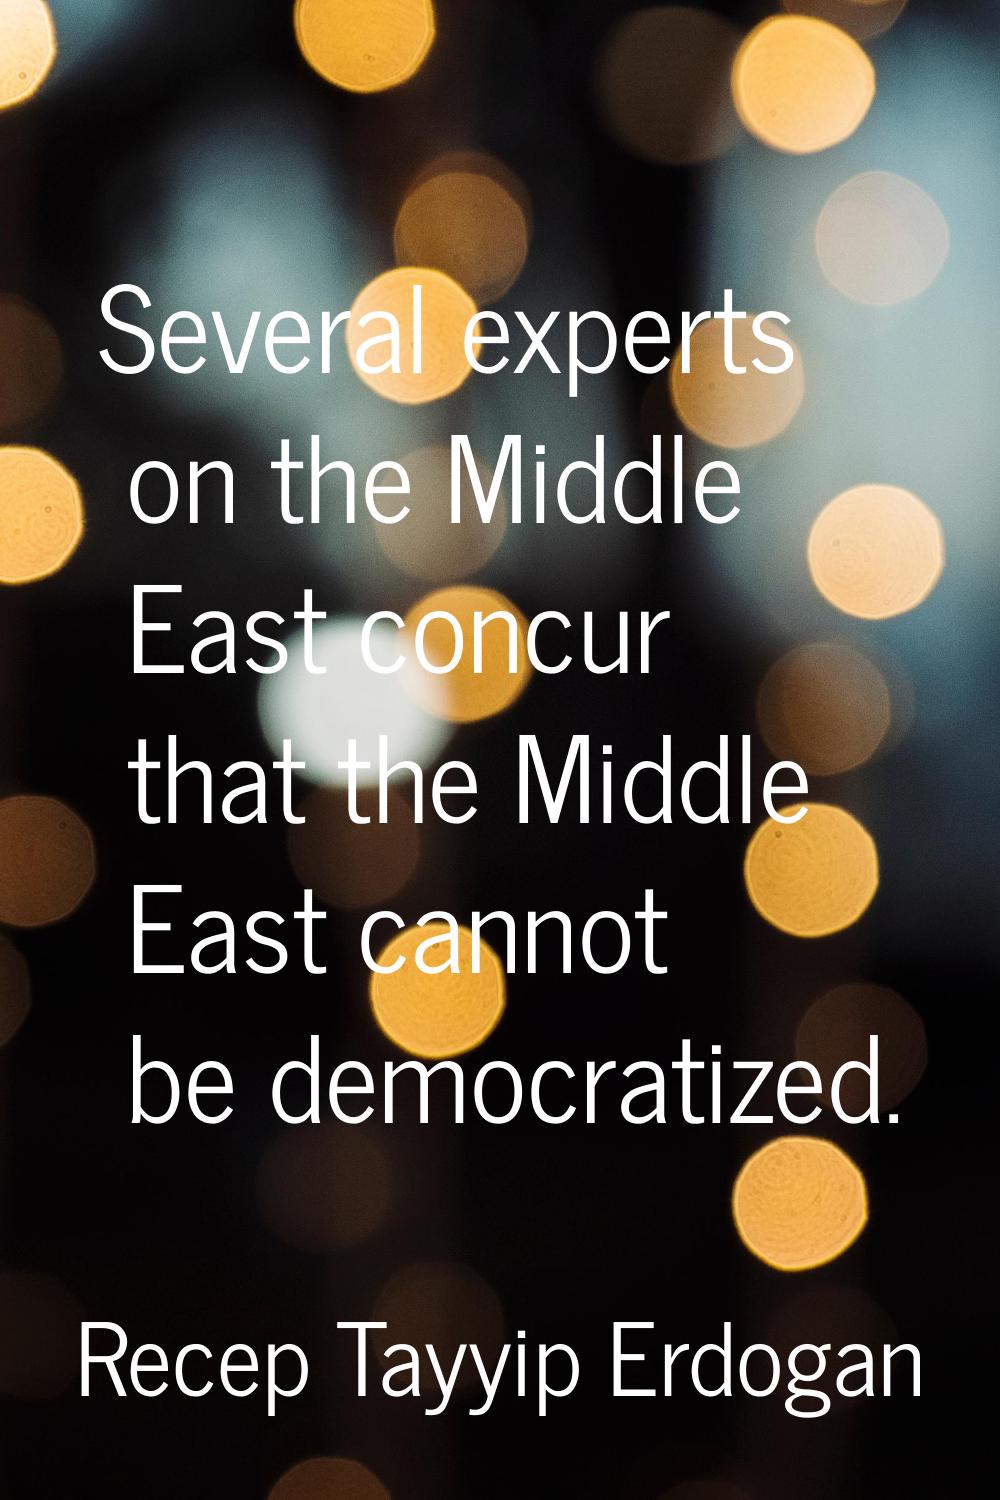 Several experts on the Middle East concur that the Middle East cannot be democratized.